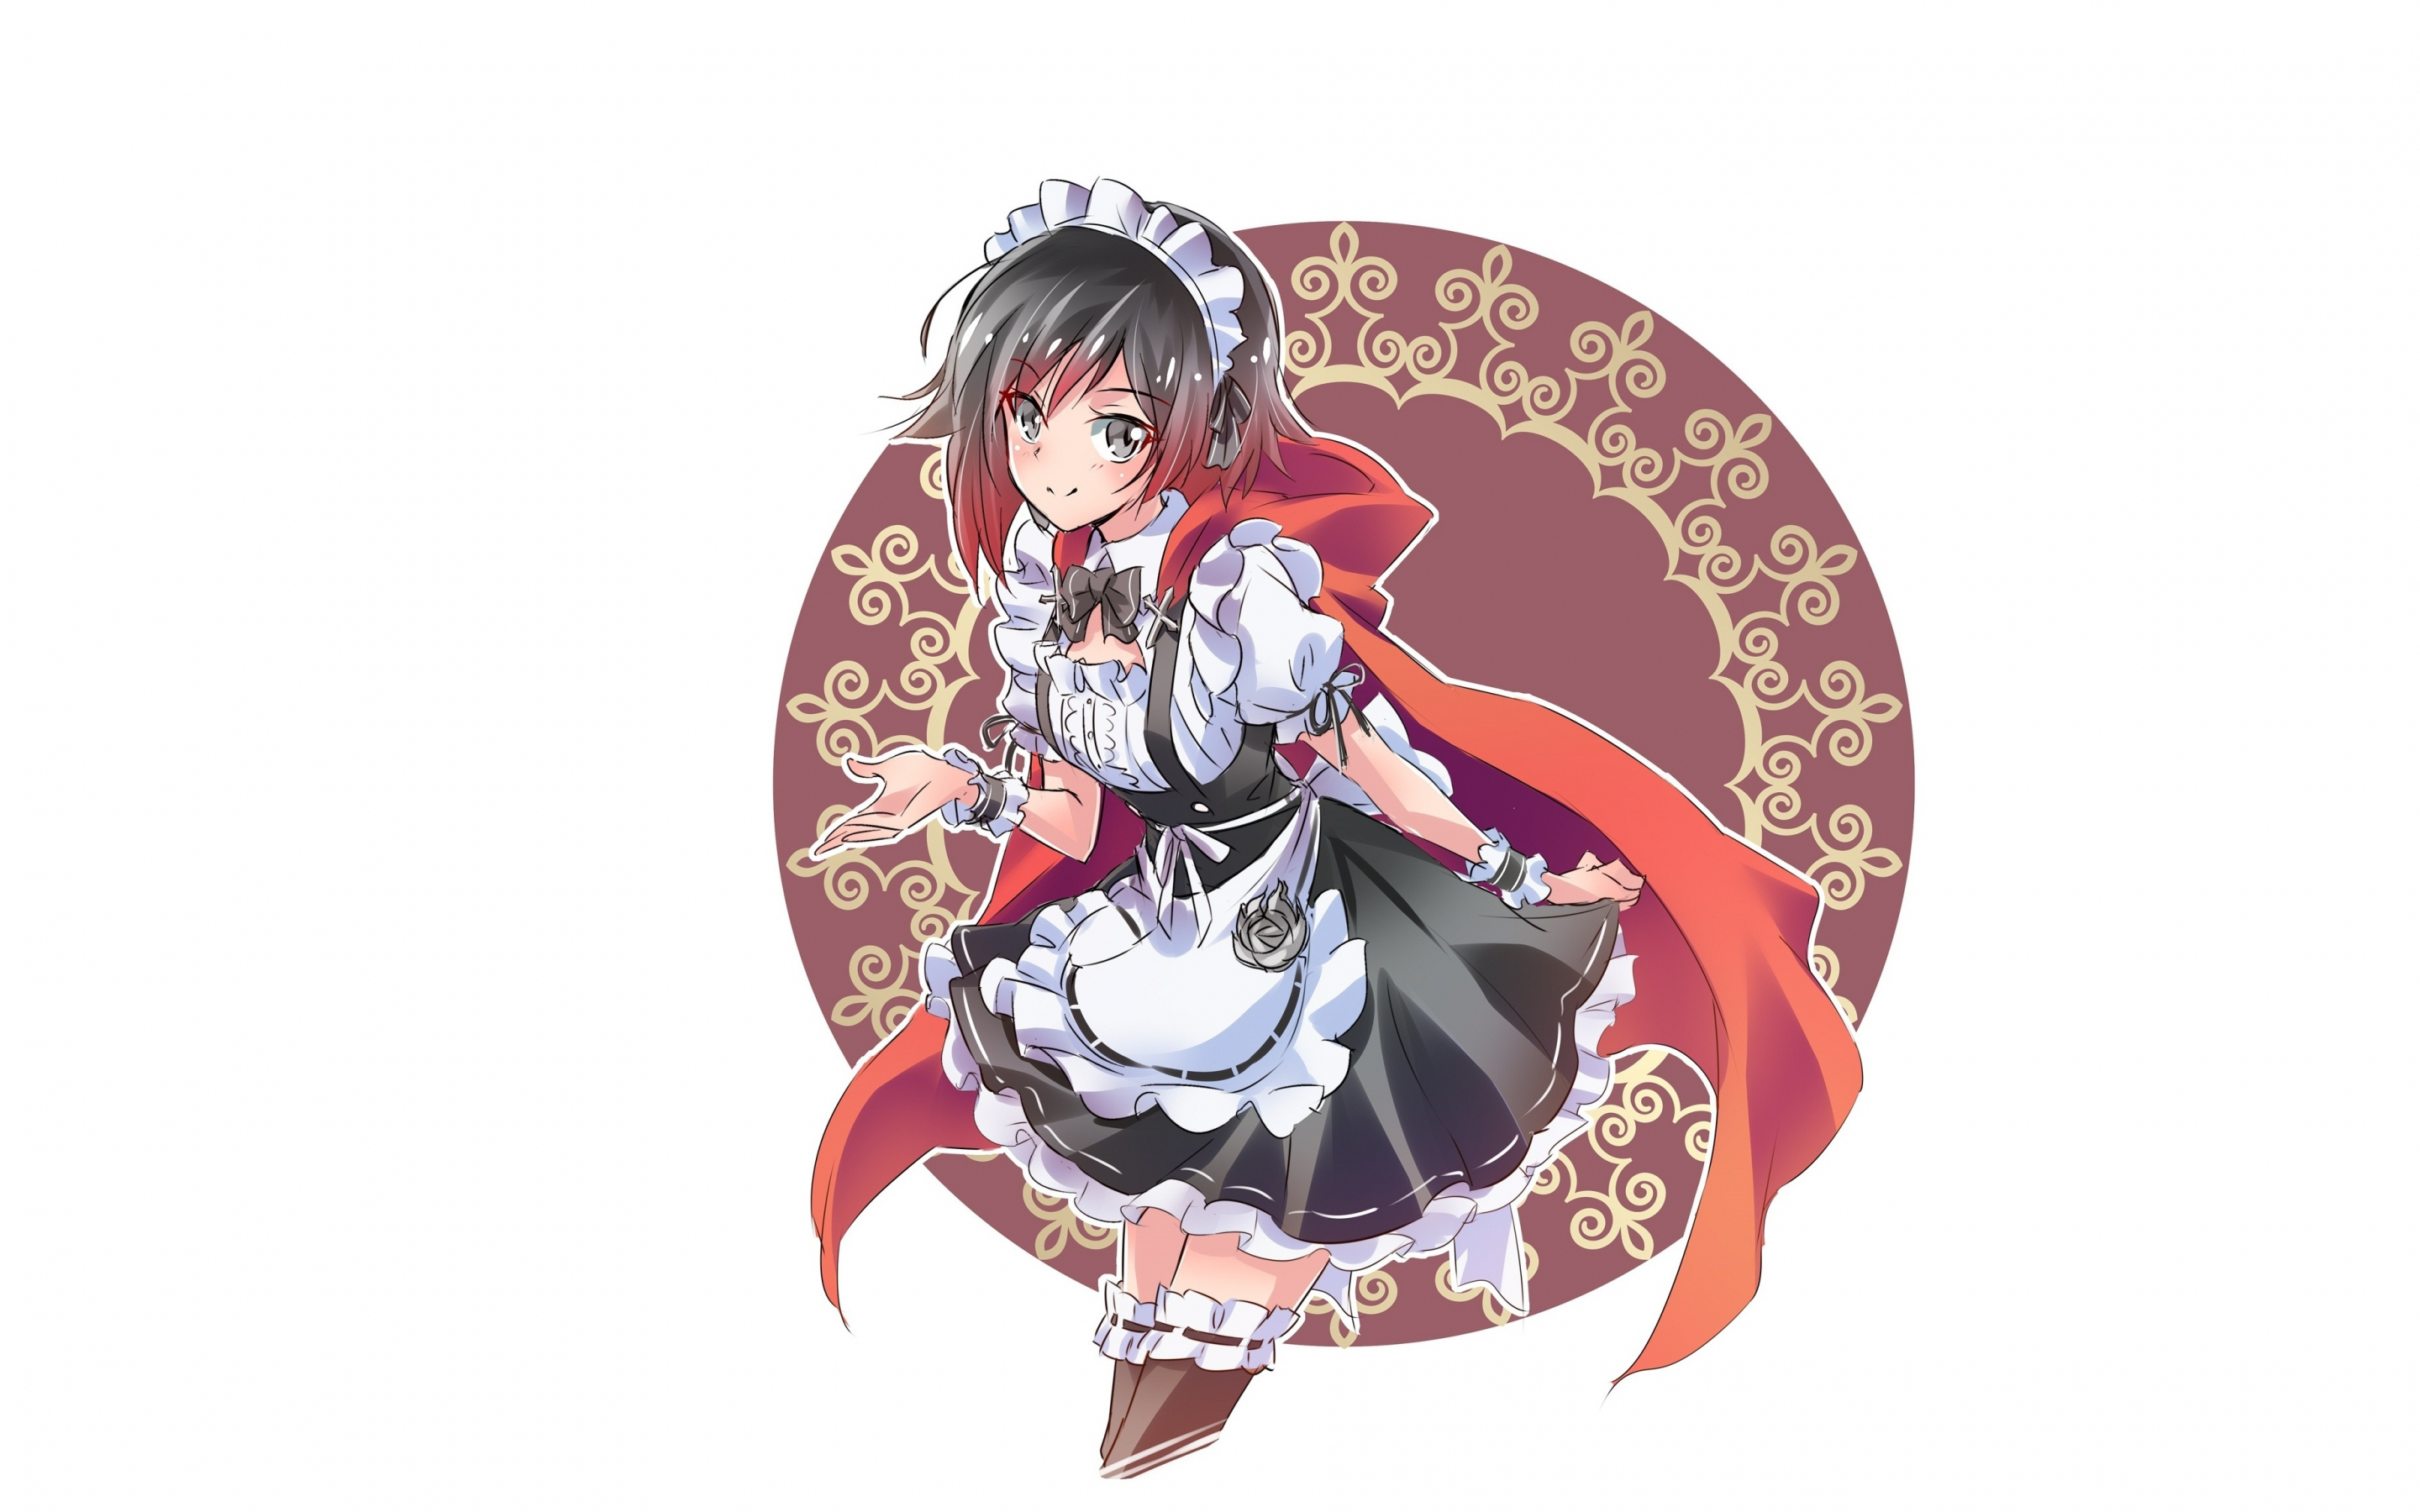 Cute, Ruby rose, maid's outfit, anime girl, 2880x1800 wallpaper